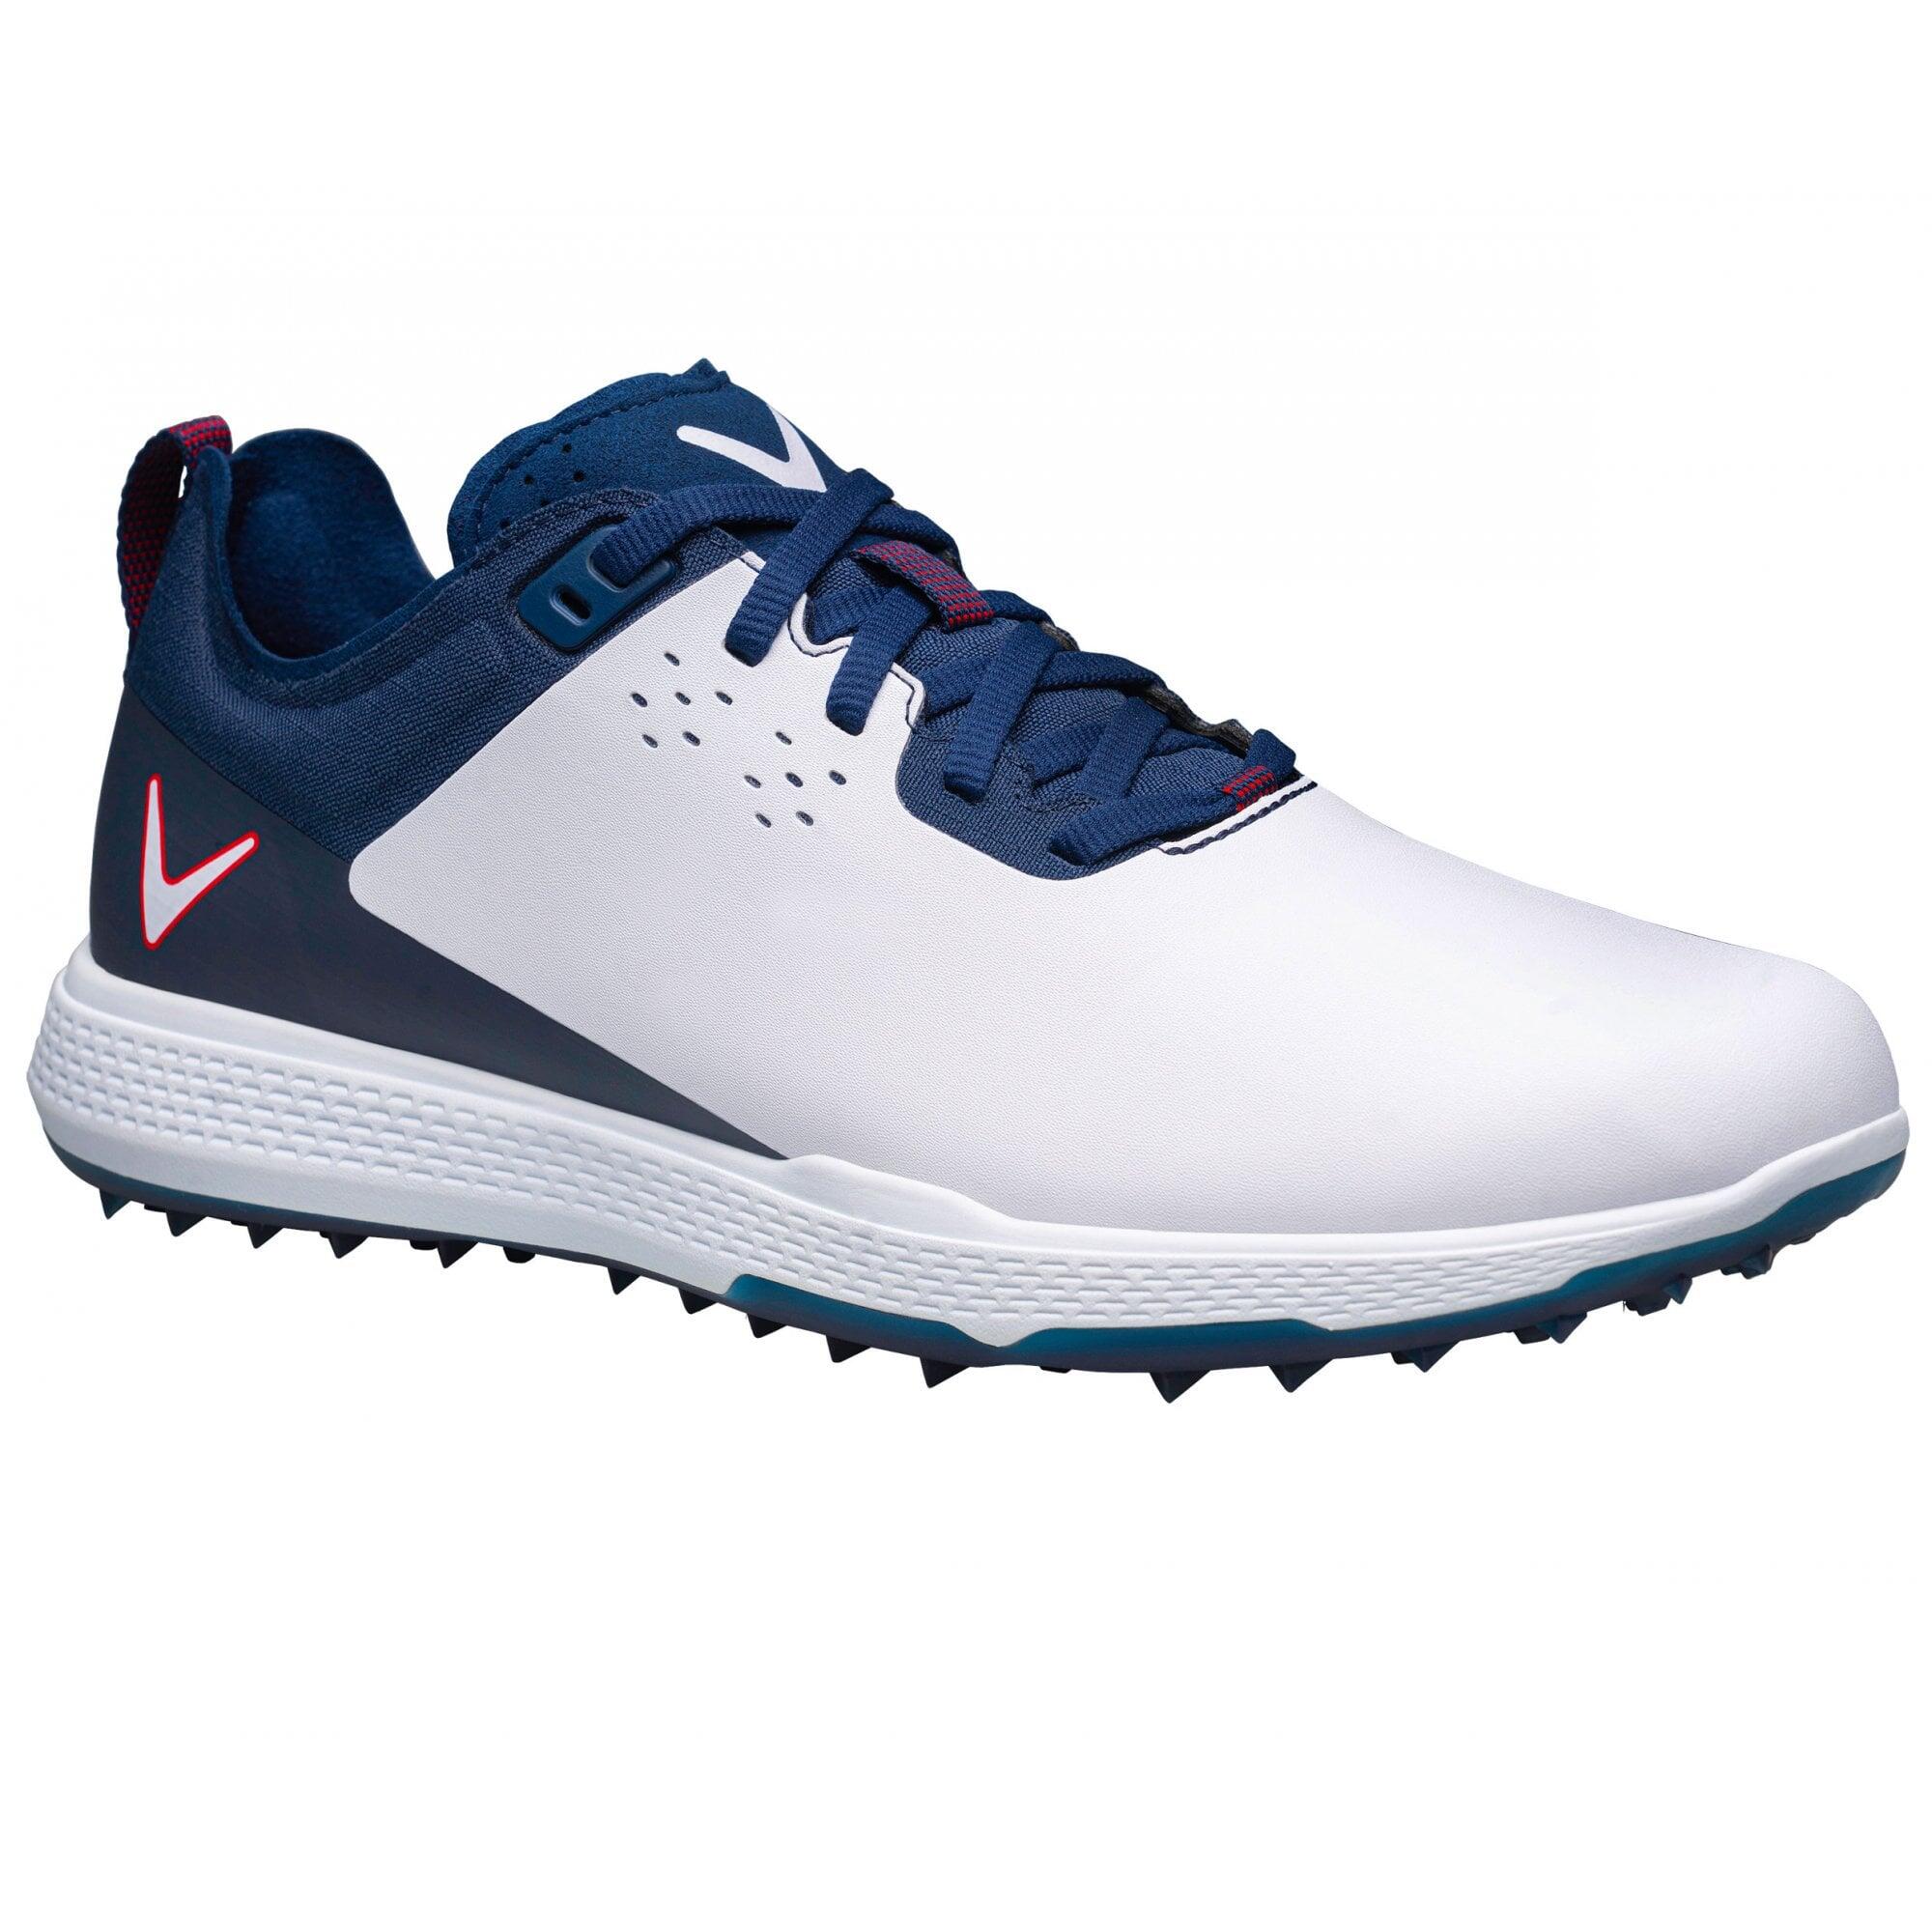 CALLAWAY Callaway 2022 Mens NITRO PRO Golf Shoes WHITE/NAVY/RED